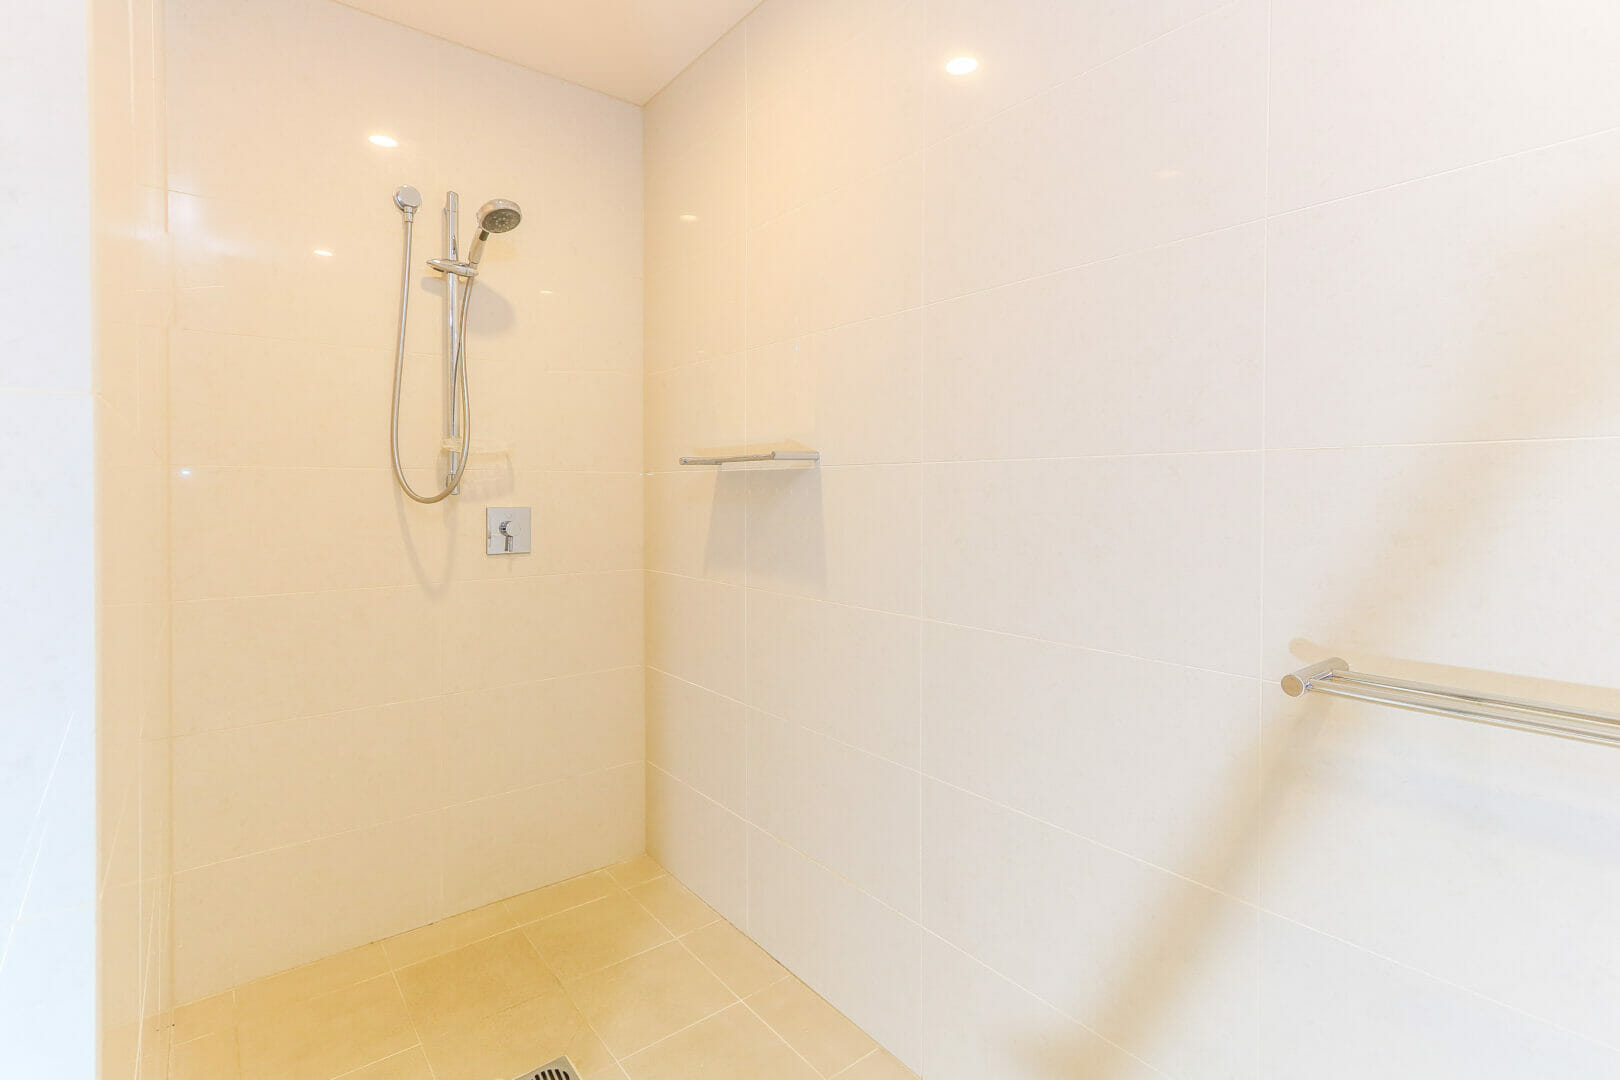 Ensuite with hand held shower